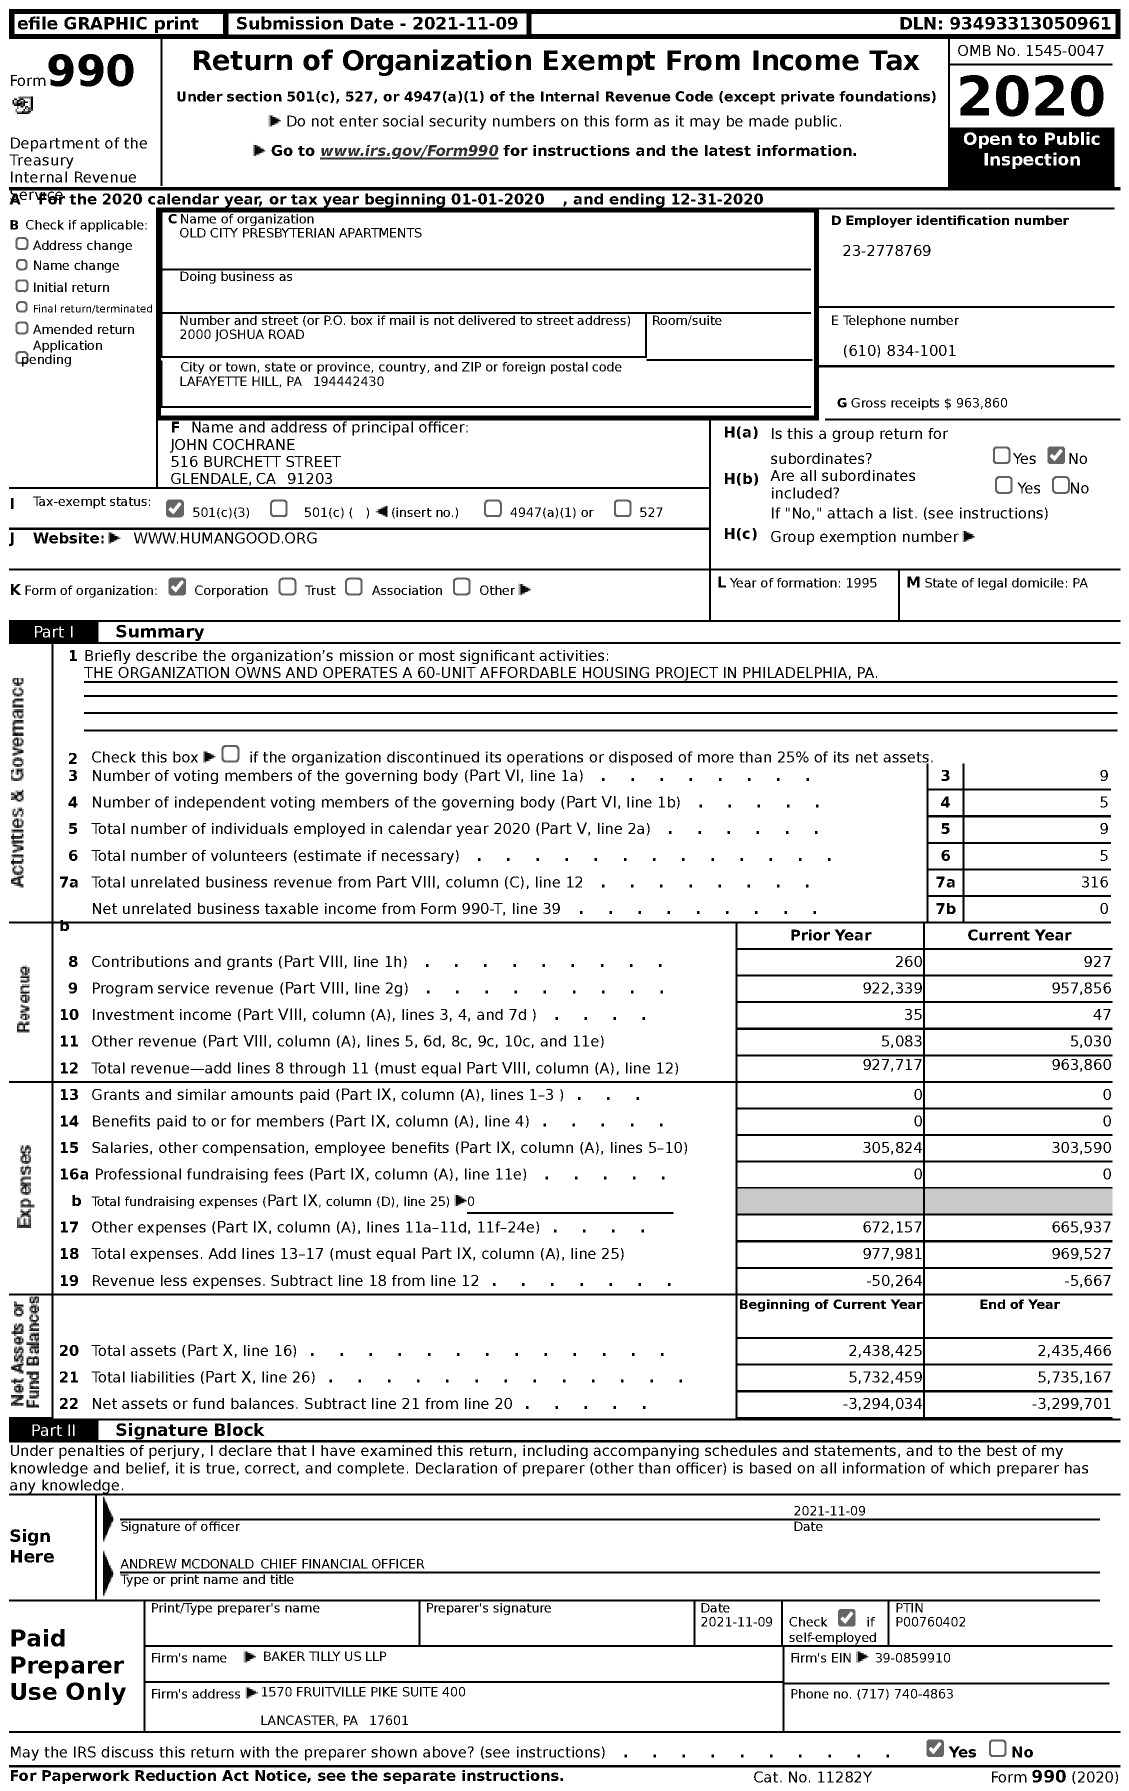 Image of first page of 2020 Form 990 for Old City Presbyterian Apartments